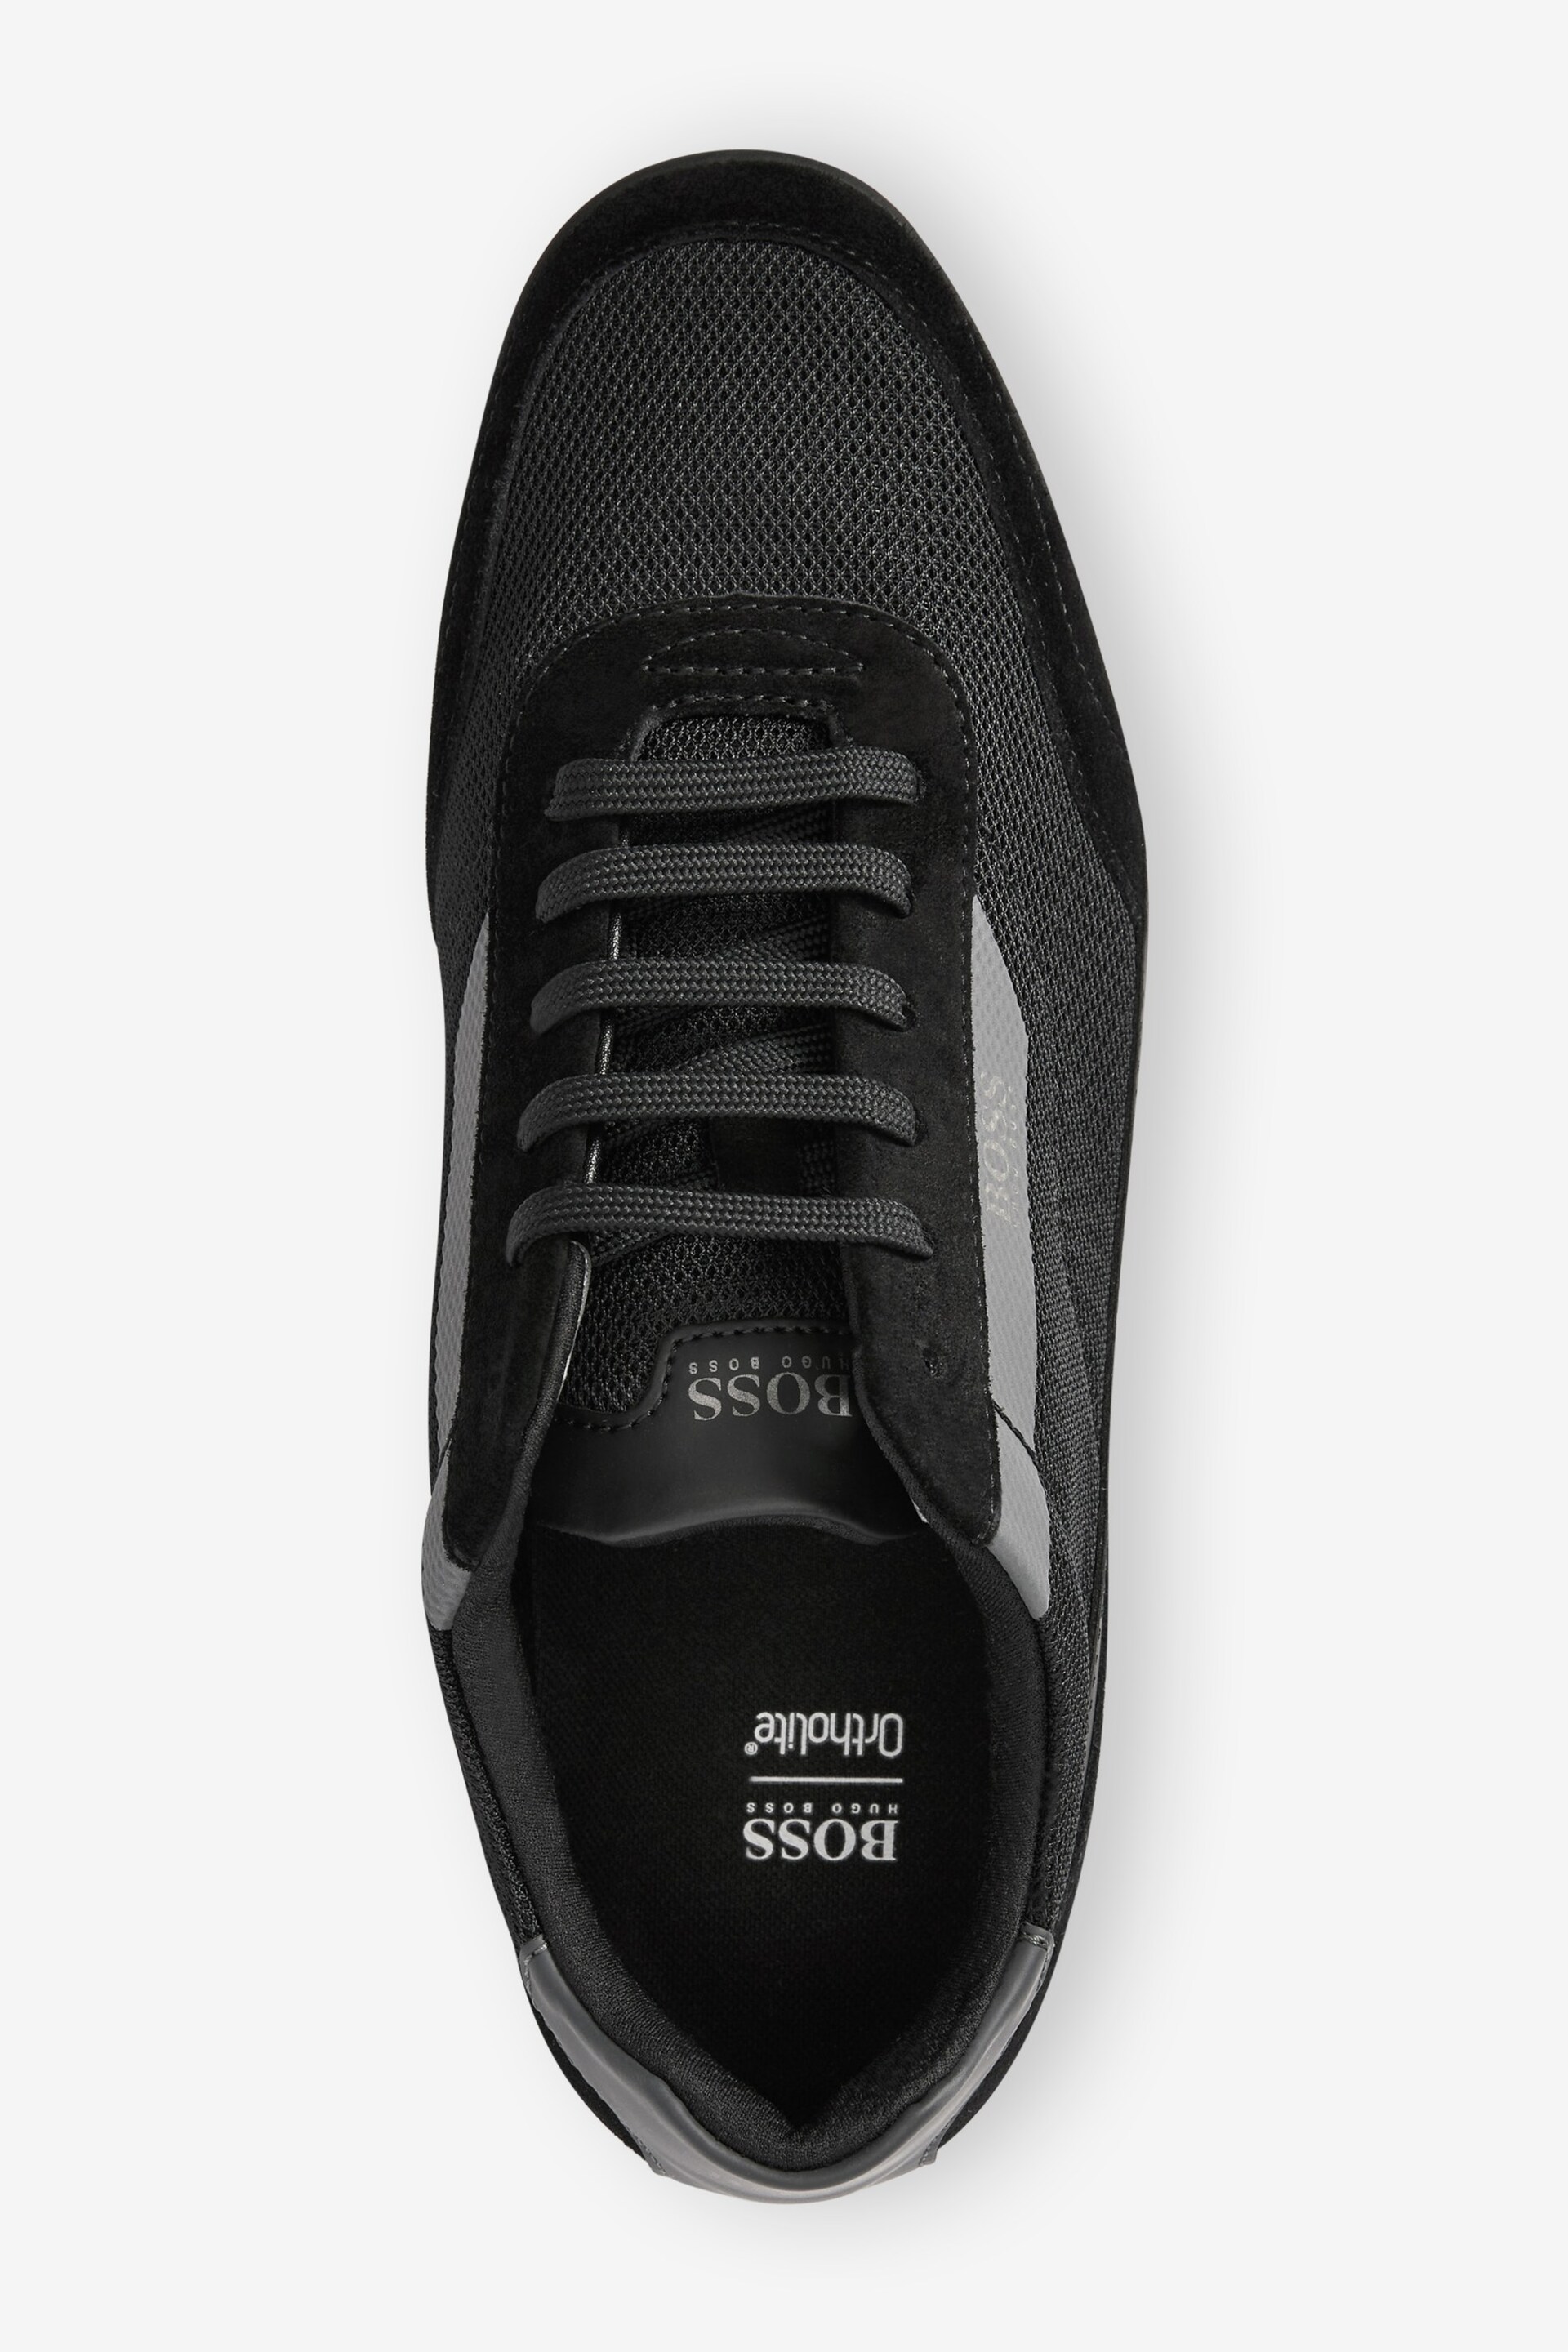 BOSS Black Saturn Trainers - Image 3 of 6